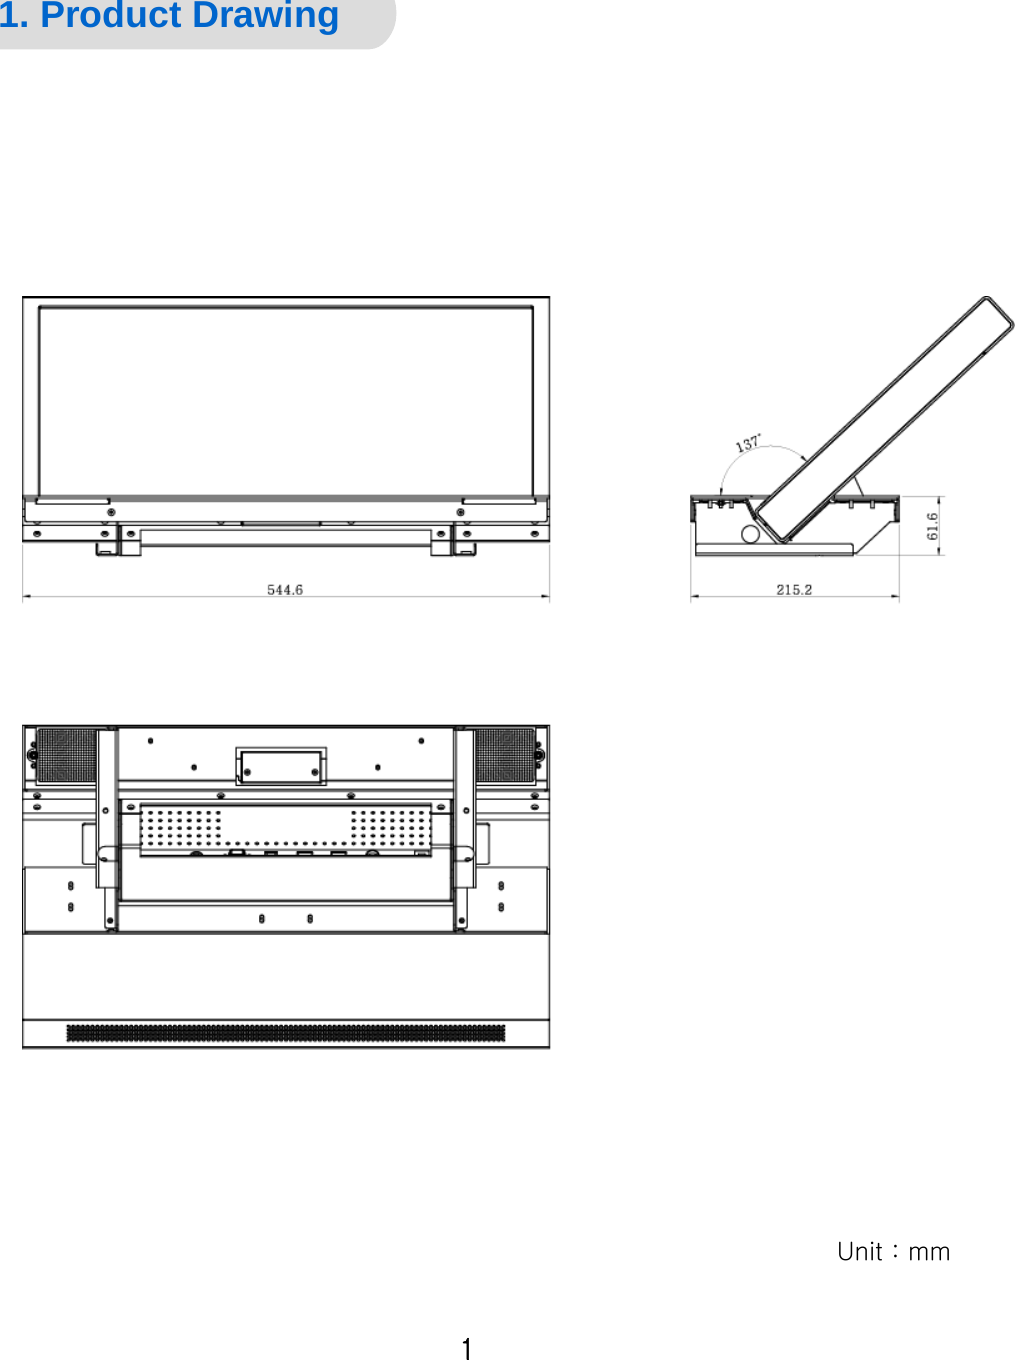 General Specification 1. Product DrawingUnit : mm1